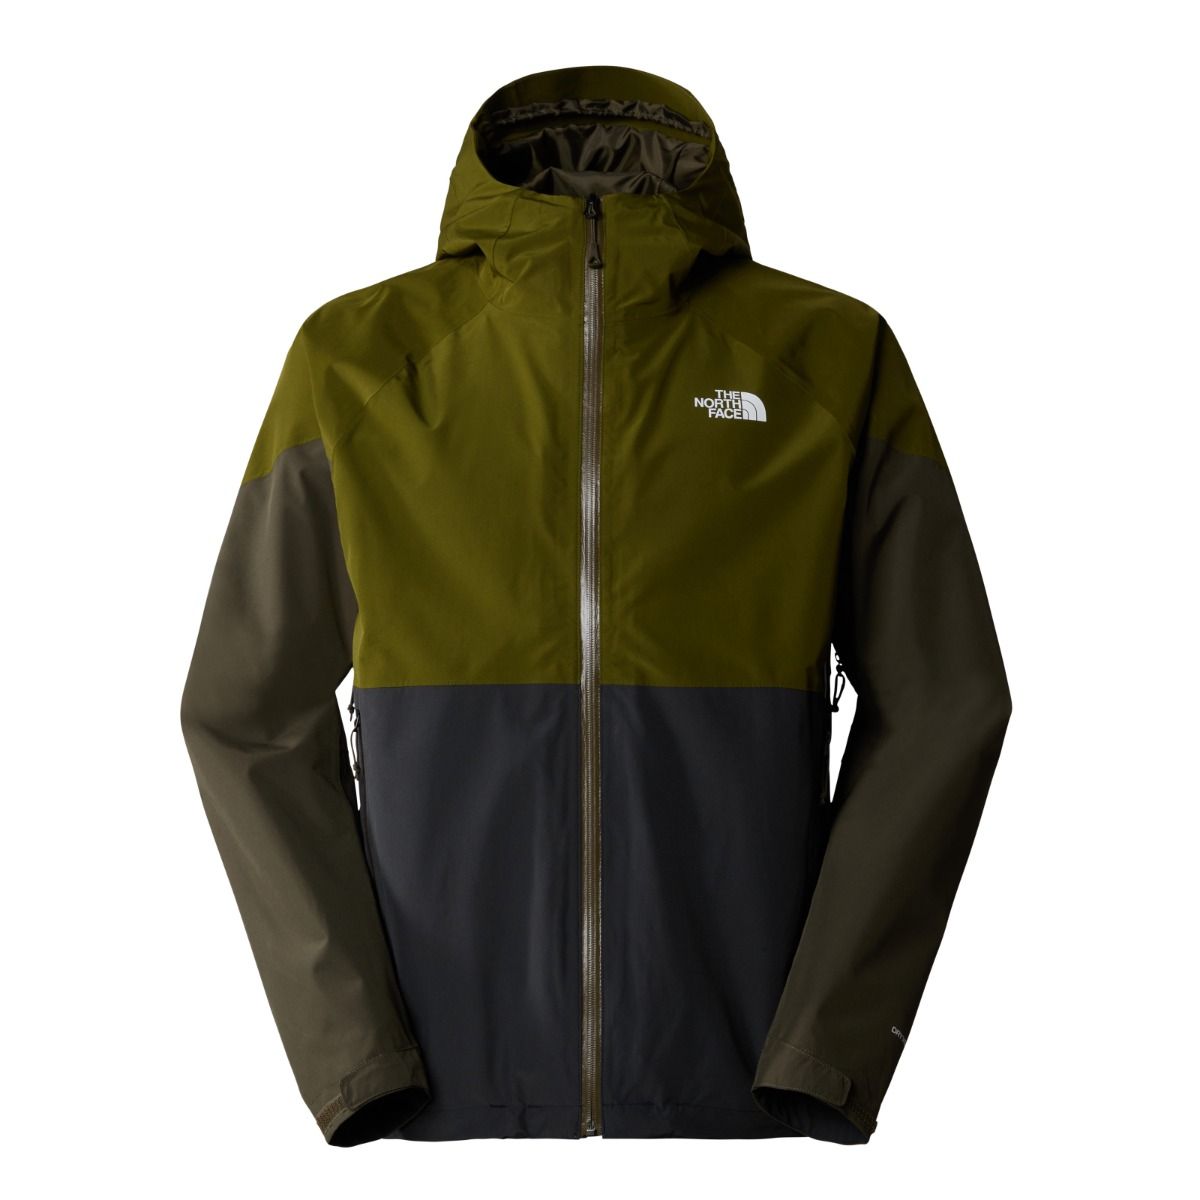 The North Face - M's LIGHTNING ZIP-IN JACKET